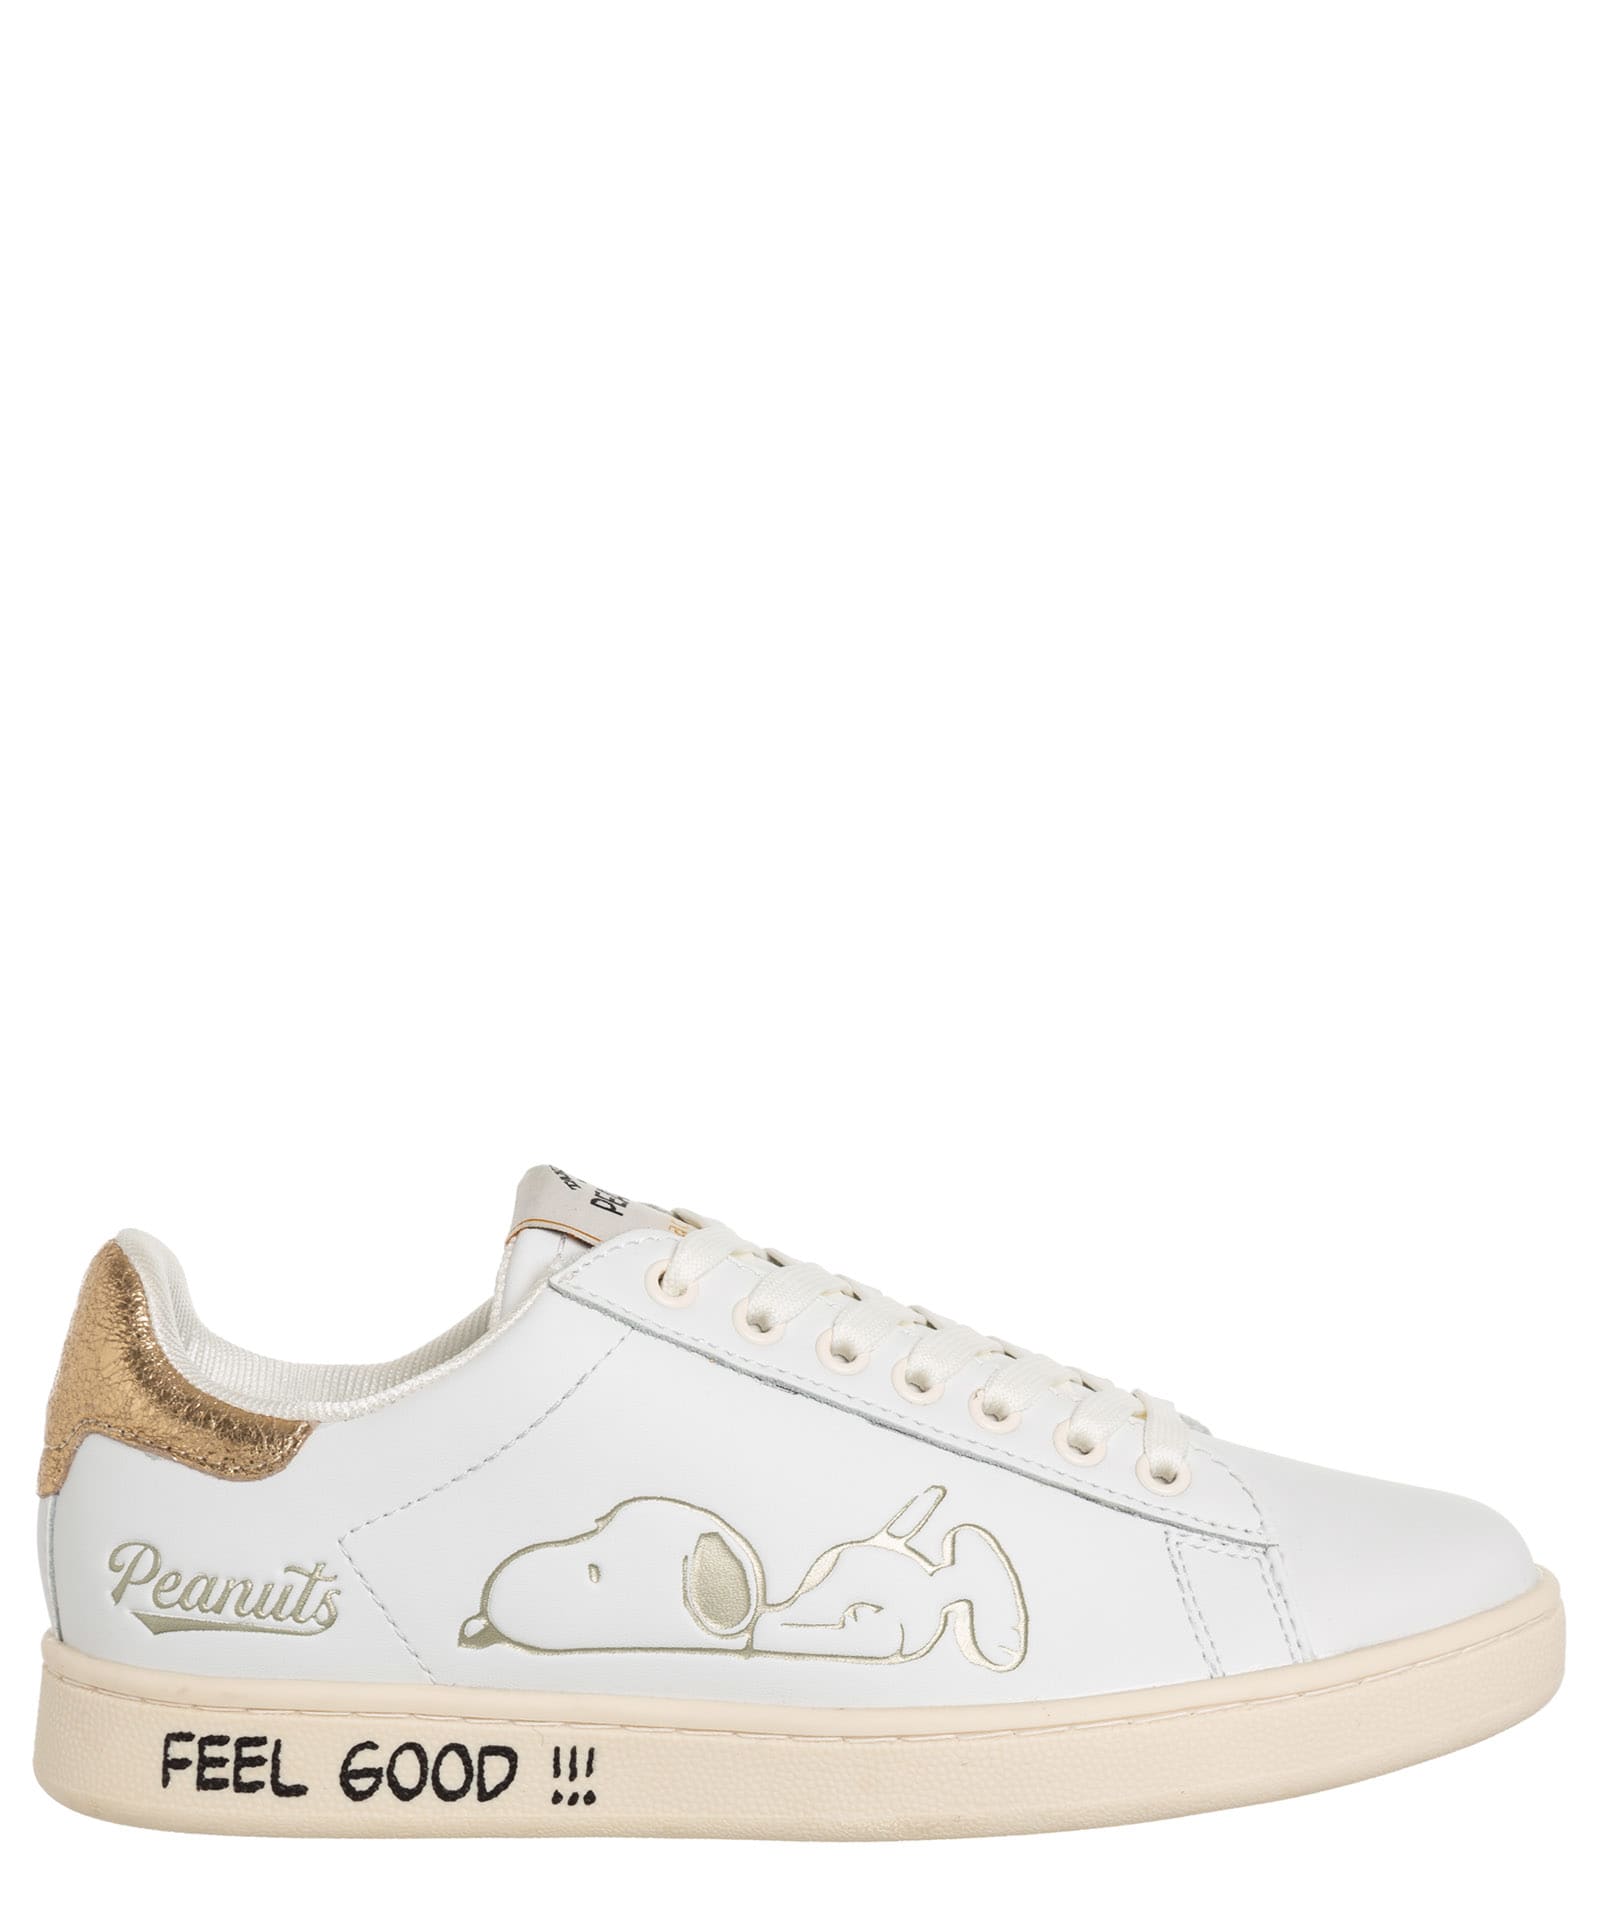 M.O.A. master of arts Peanuts Snoopy Gallery Leather Sneakers